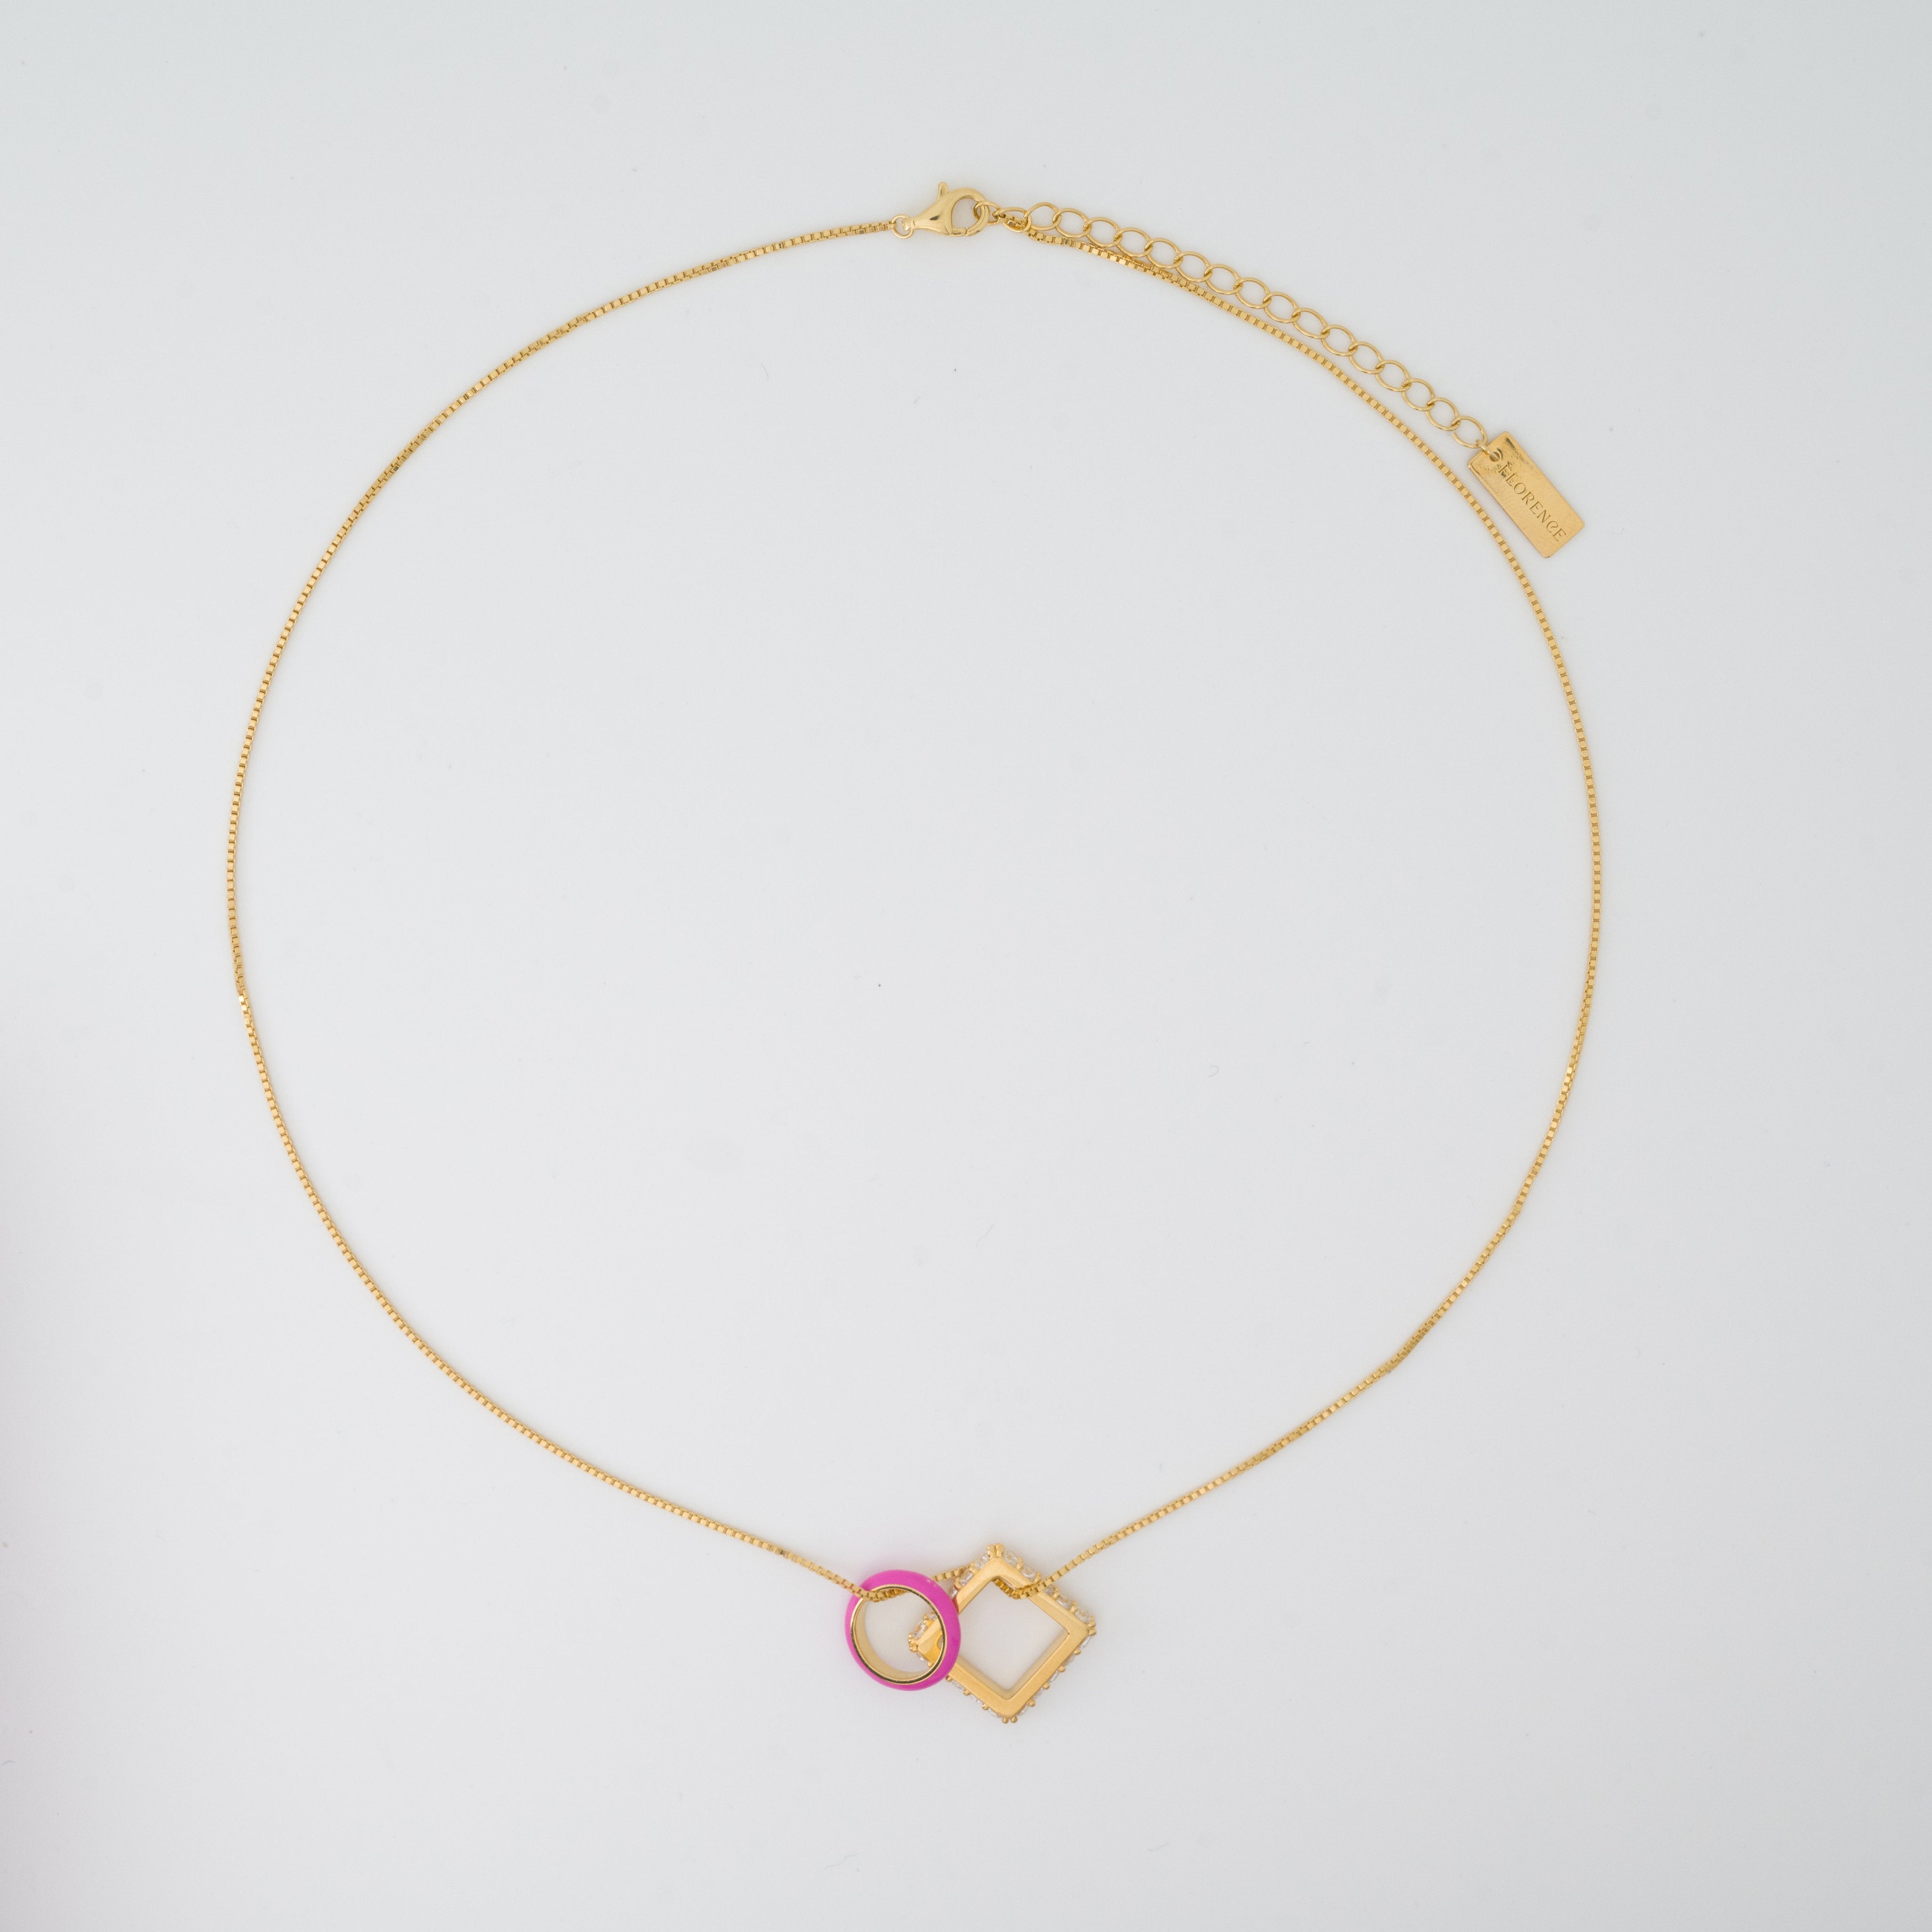 Nemy Stones and Neon Pink Enamel Hoops Gold Necklace